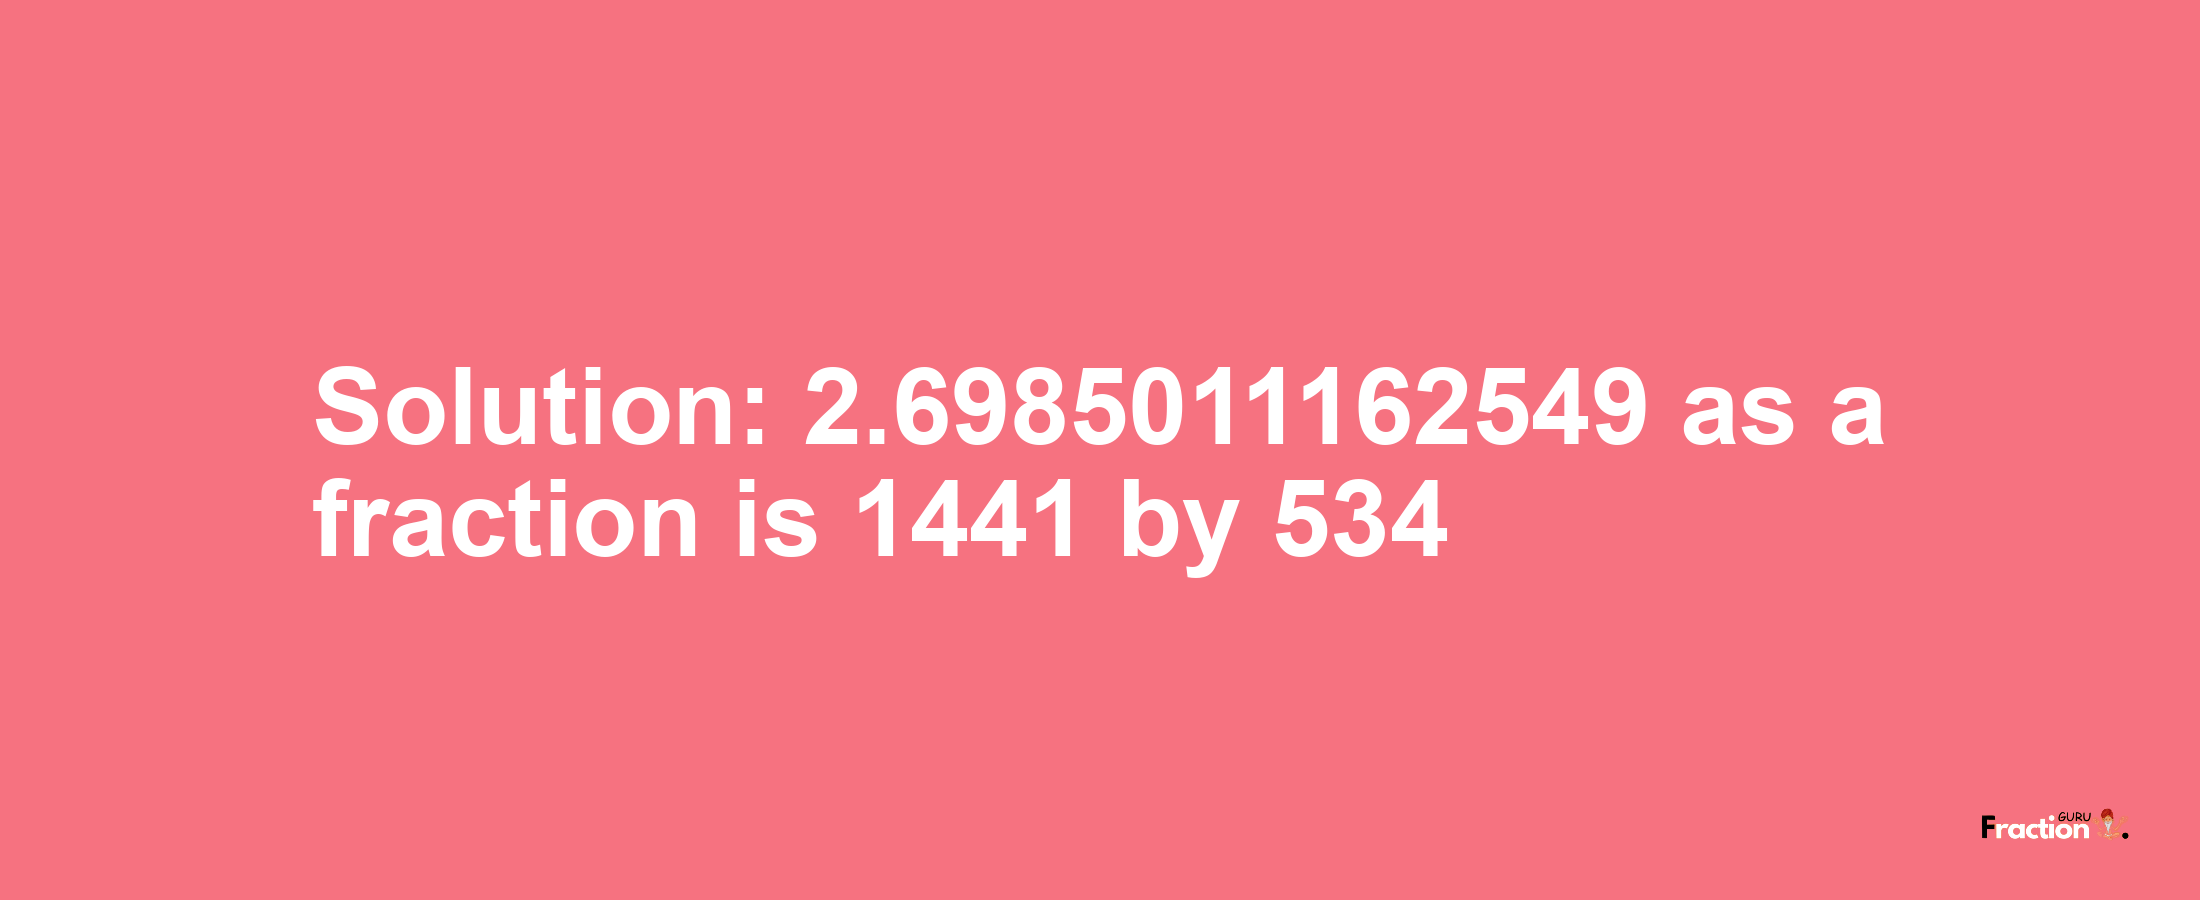 Solution:2.6985011162549 as a fraction is 1441/534